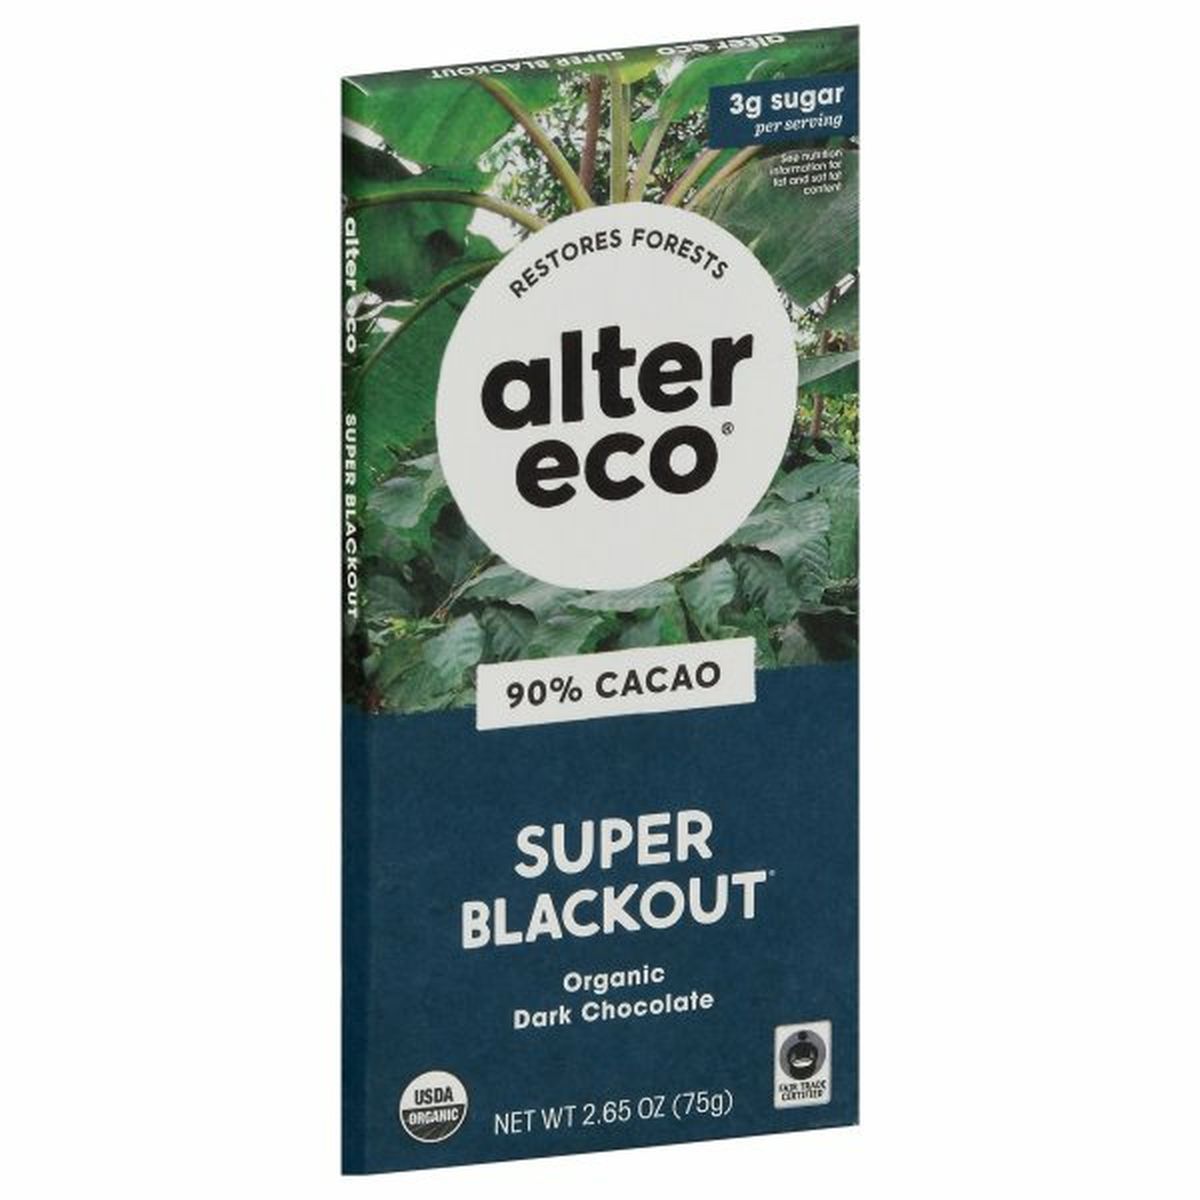 Calories in Alter Eco Dark Chocolate, Super Blackout, 90% Cacao